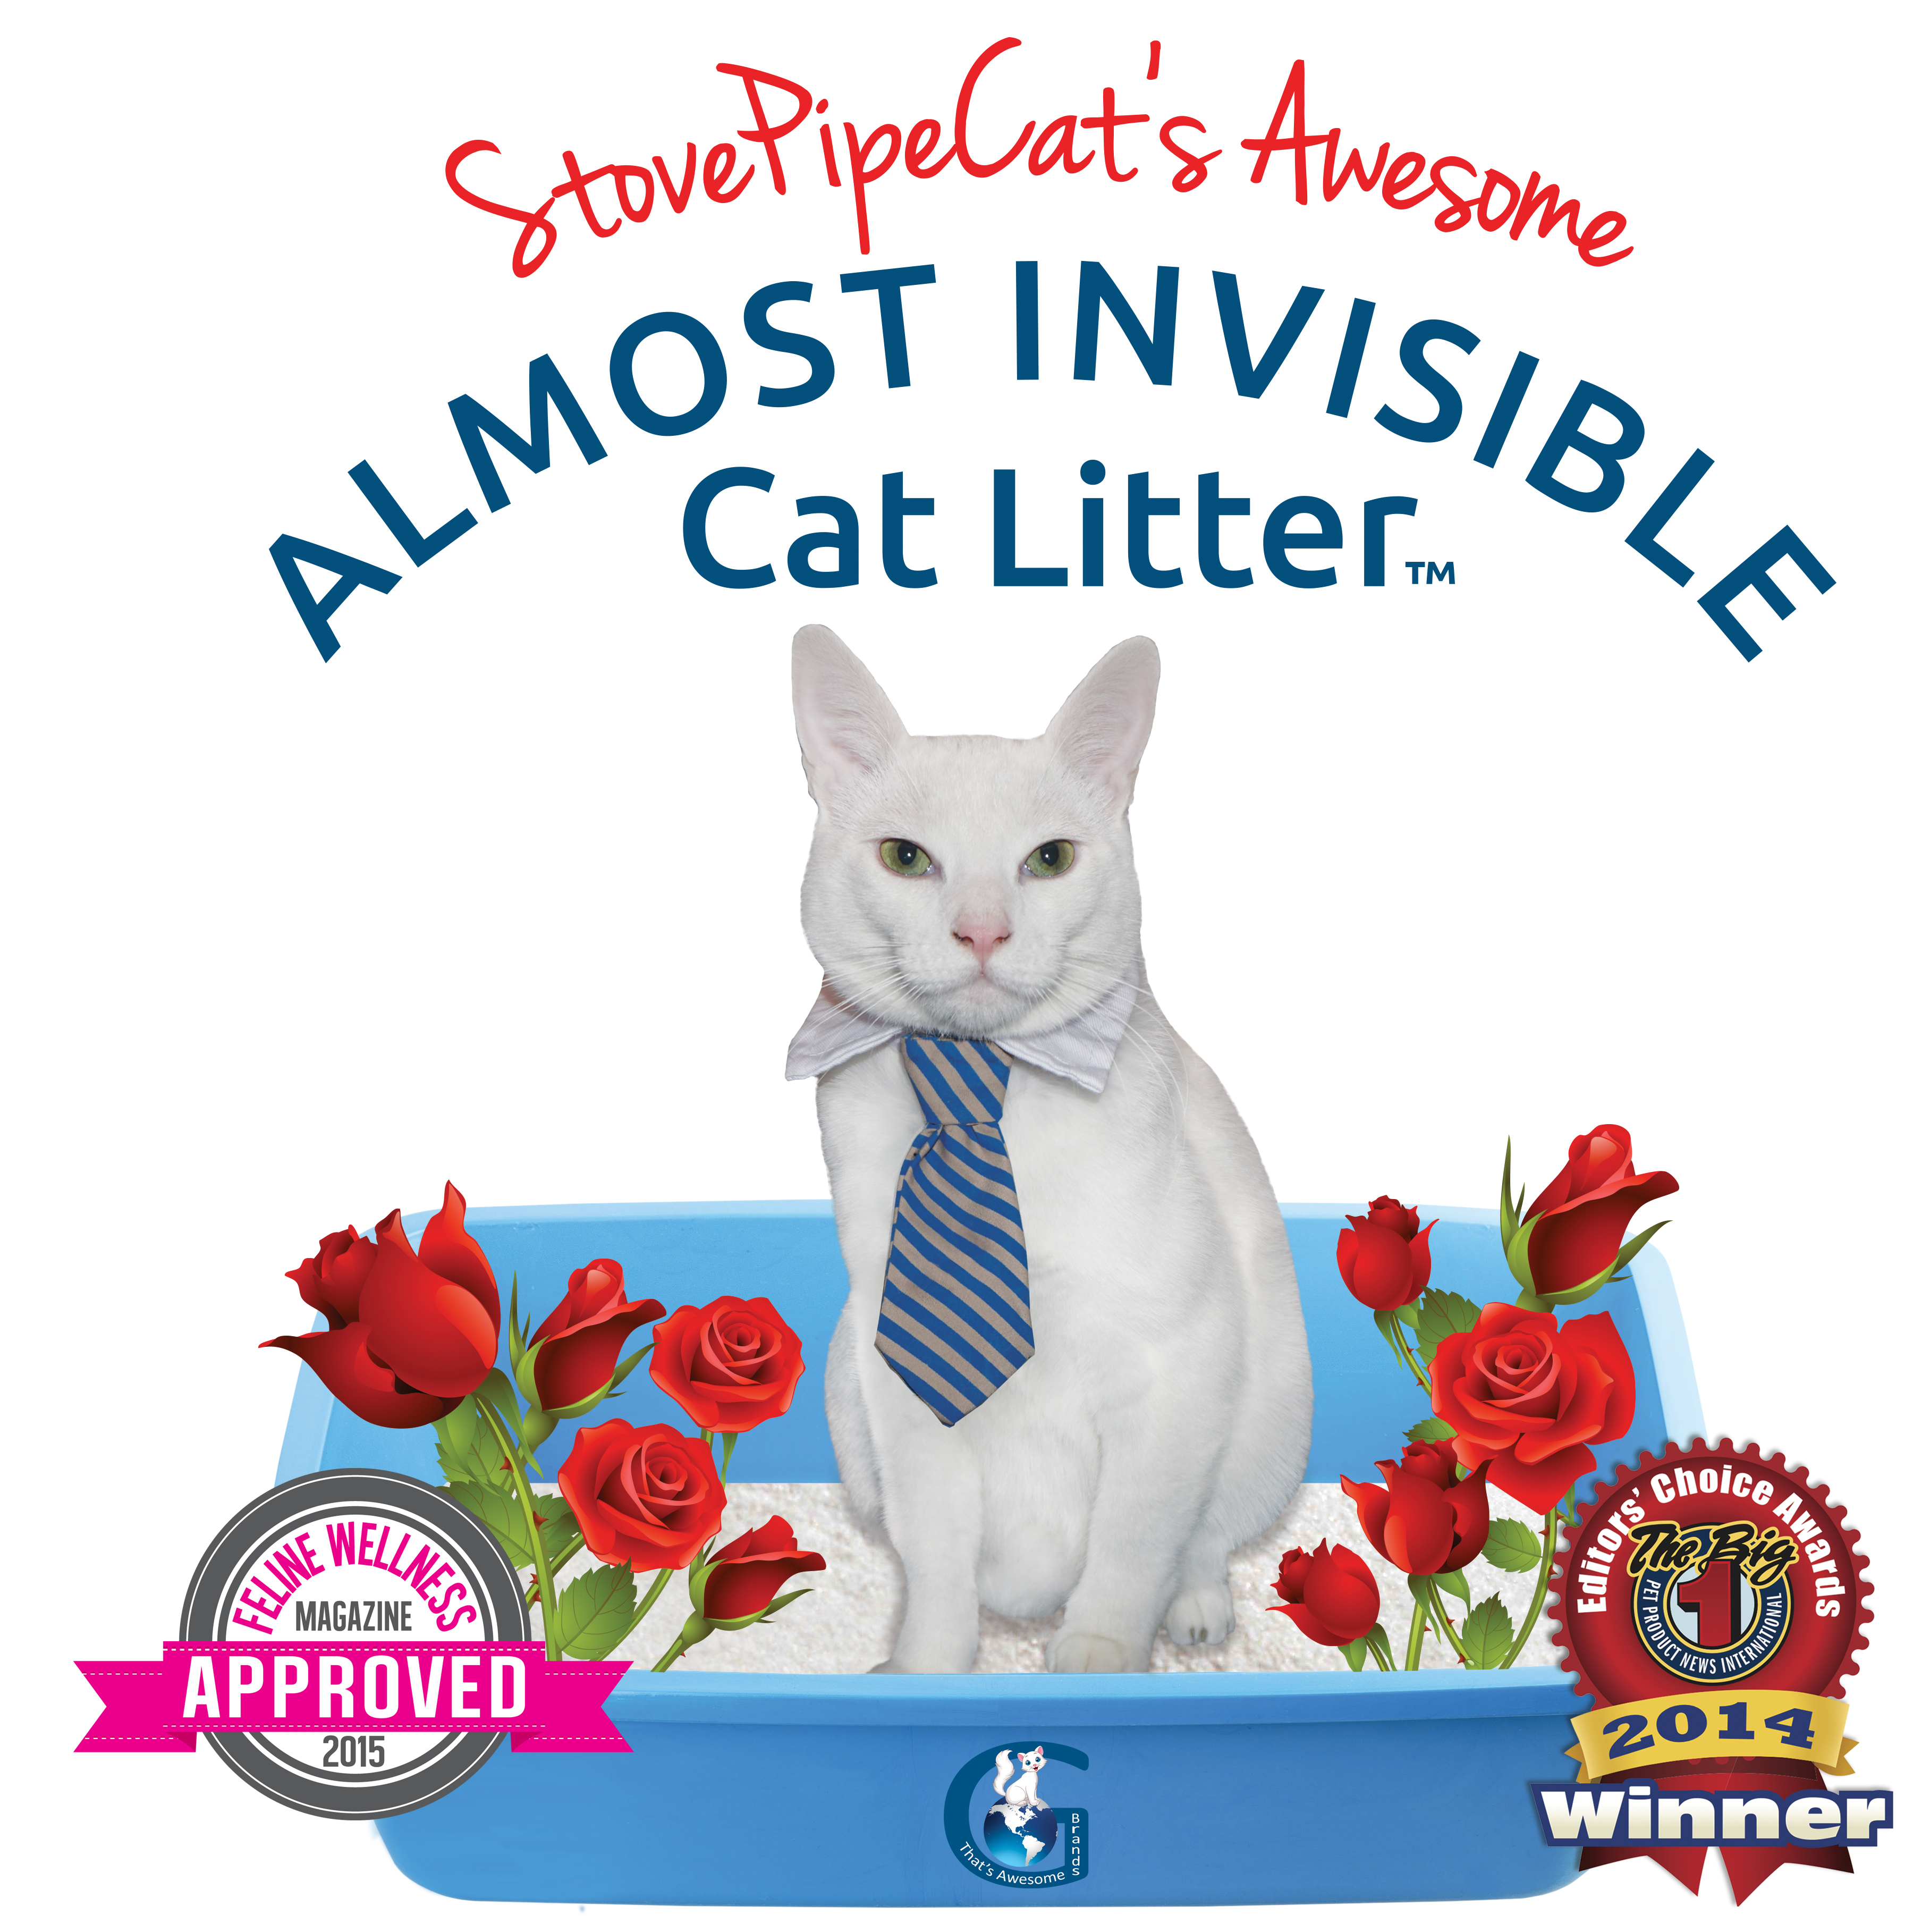 almost-invisible-catlitter-logo-stovepipecat-stovepipe.jpg